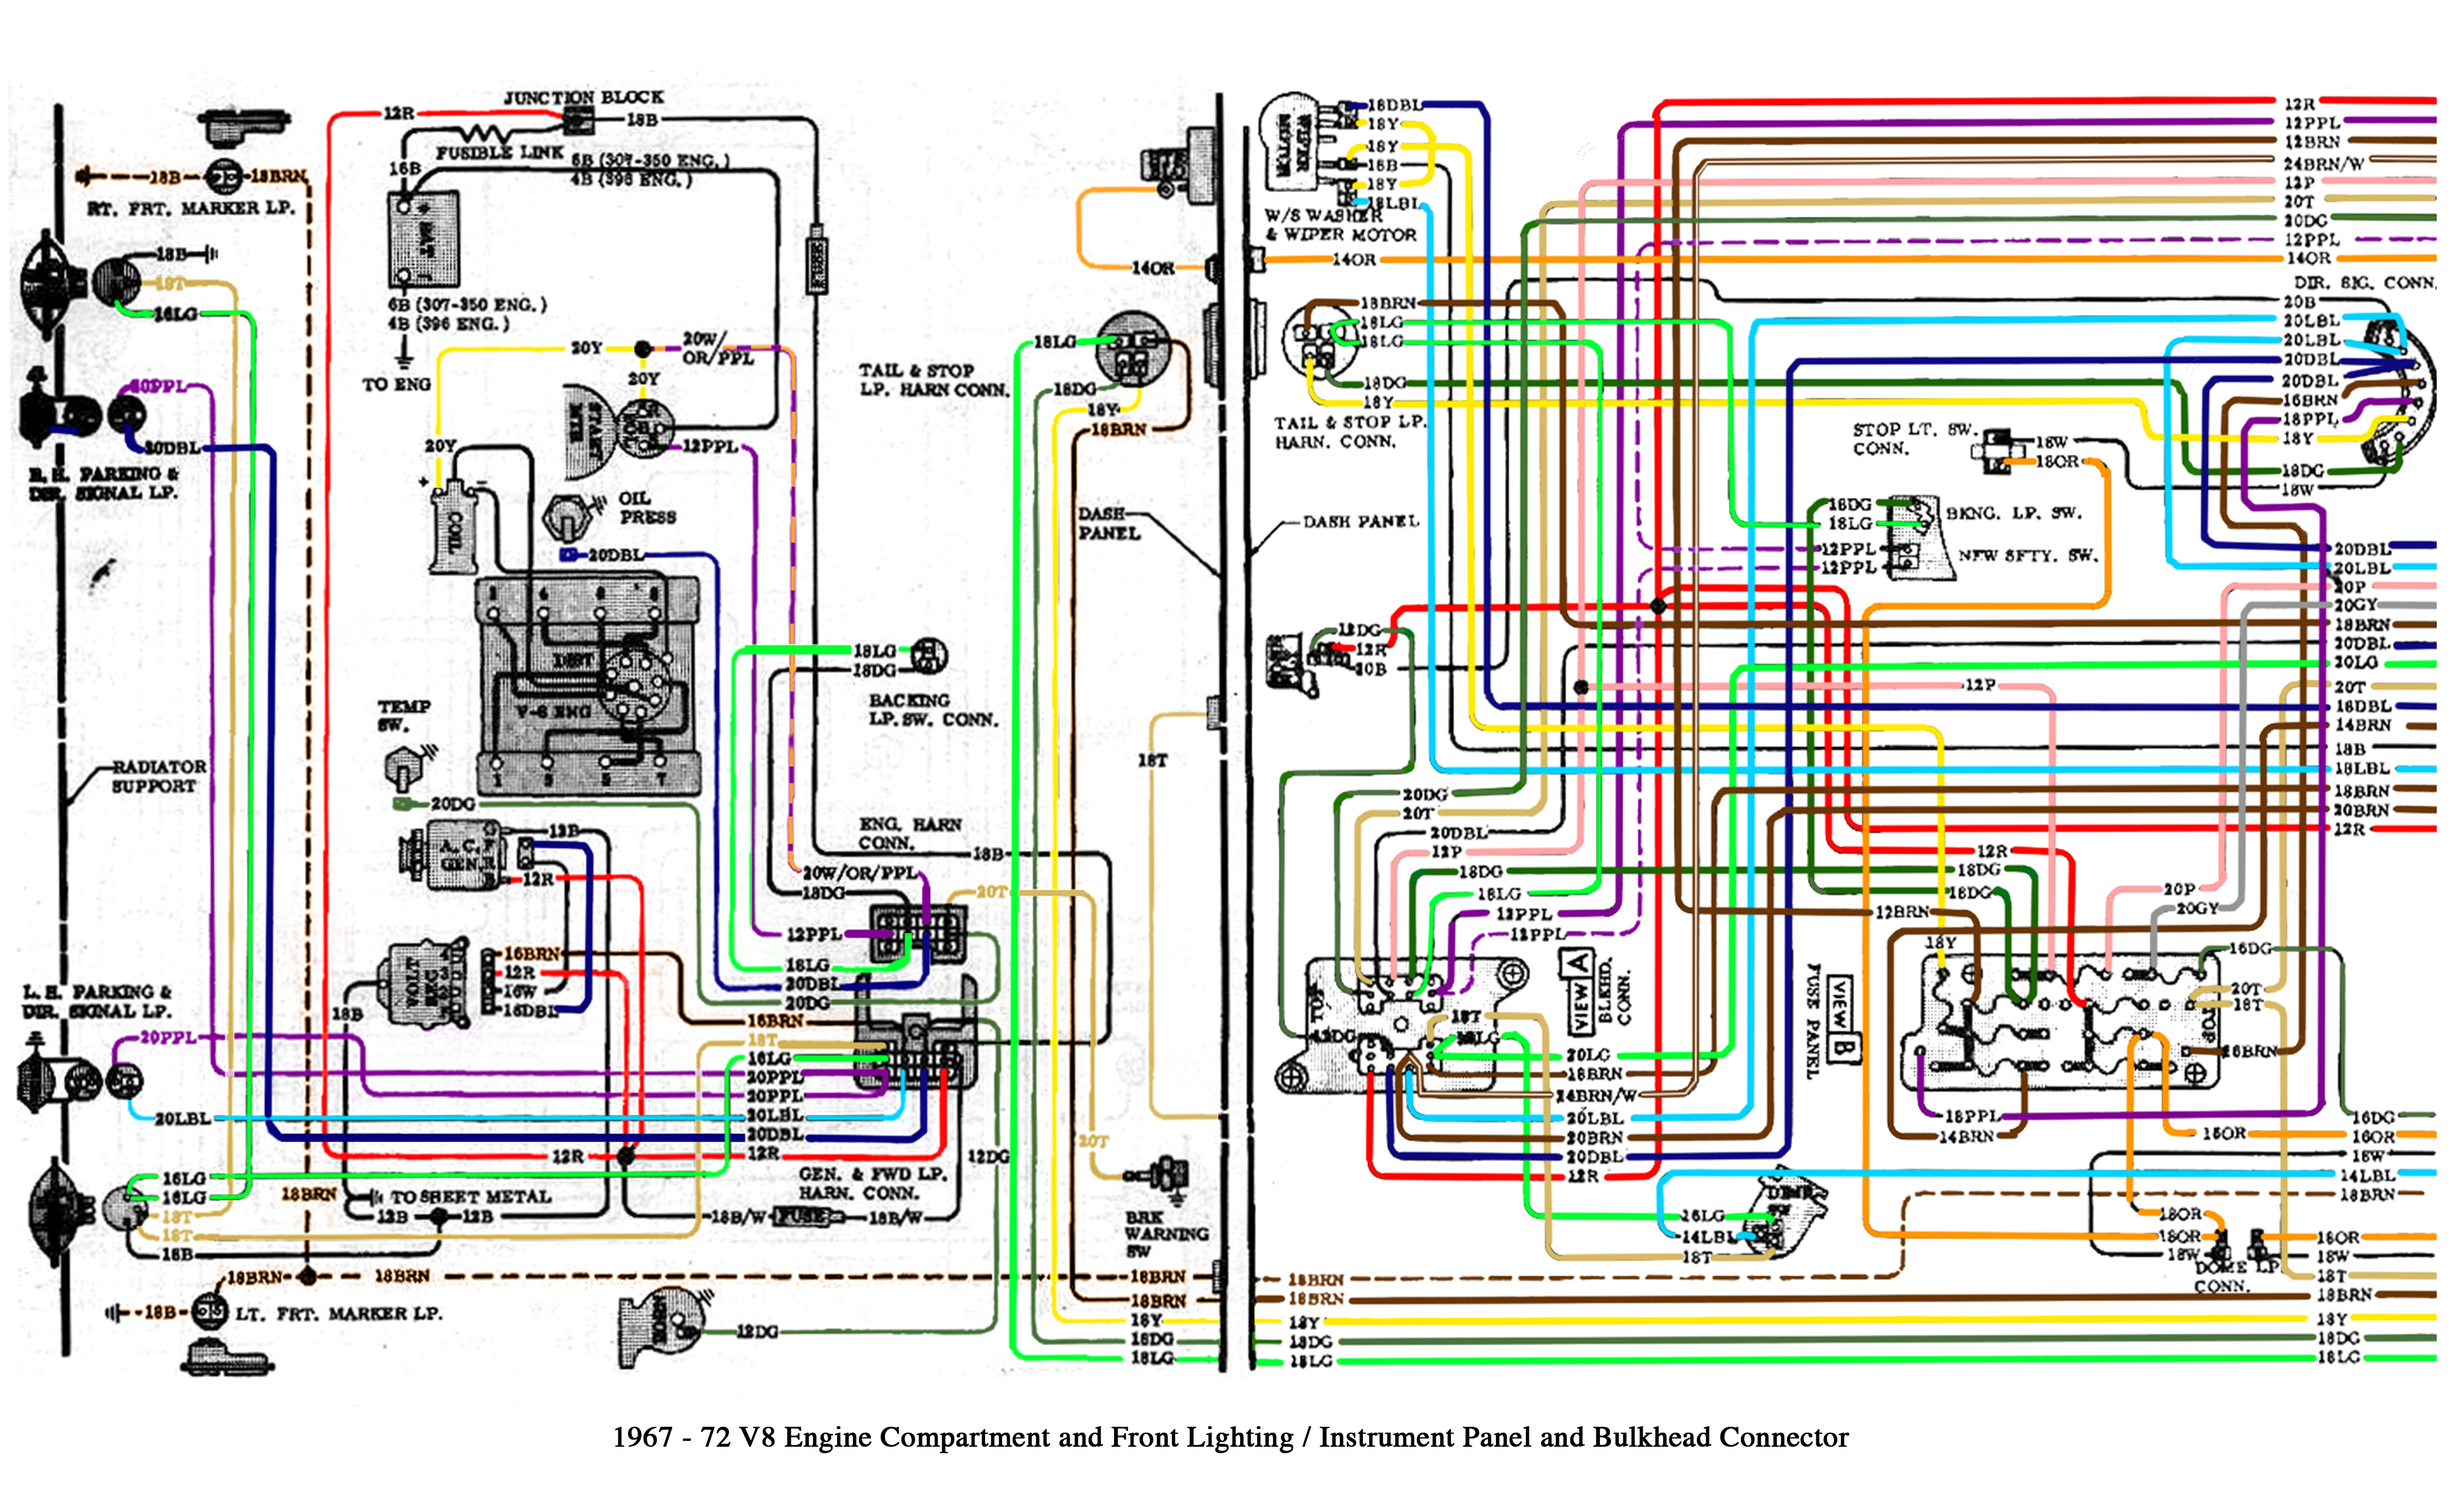 Color Wiring Diagram FINISHED - The 1947 - Present Chevrolet & GMC Truck  Message Board Network  1977 Chevy Pickup Wiring Diagram    67-72 Chevy Trucks